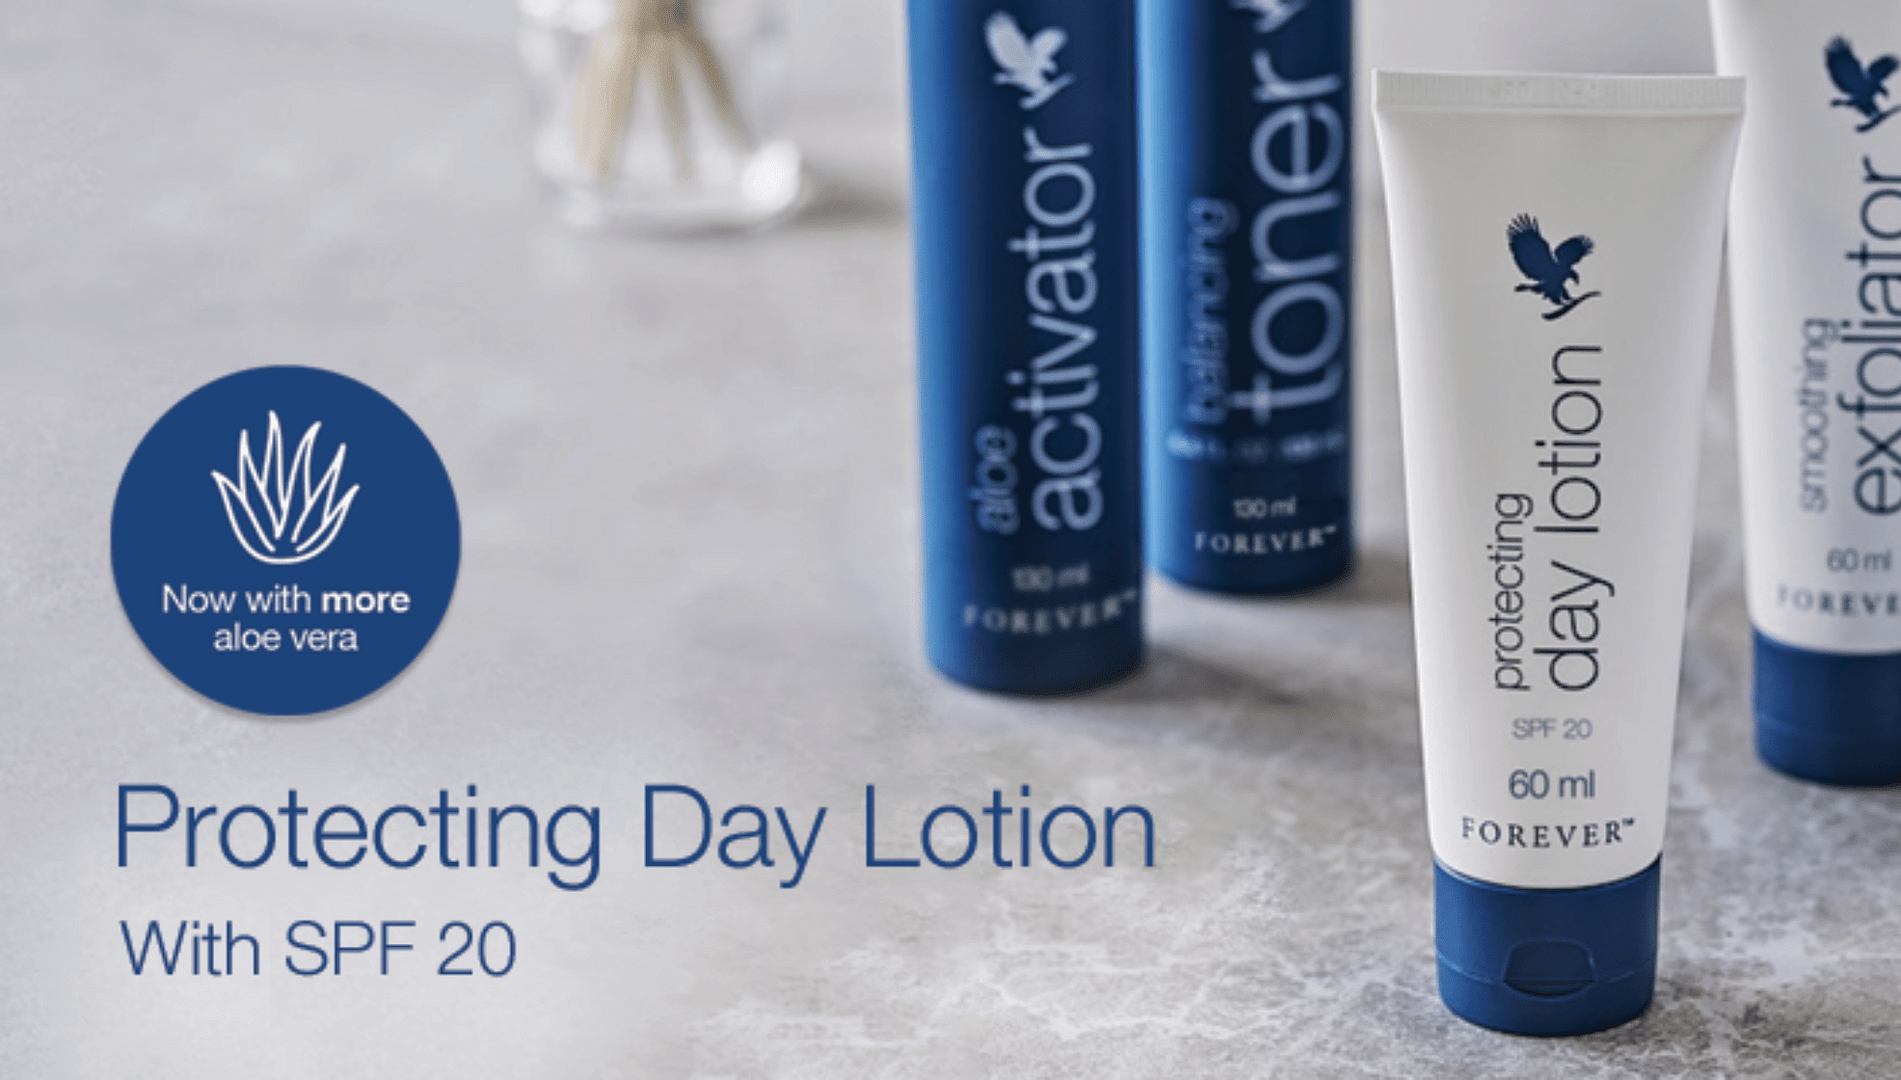 Protecting Day Lotion with SPF